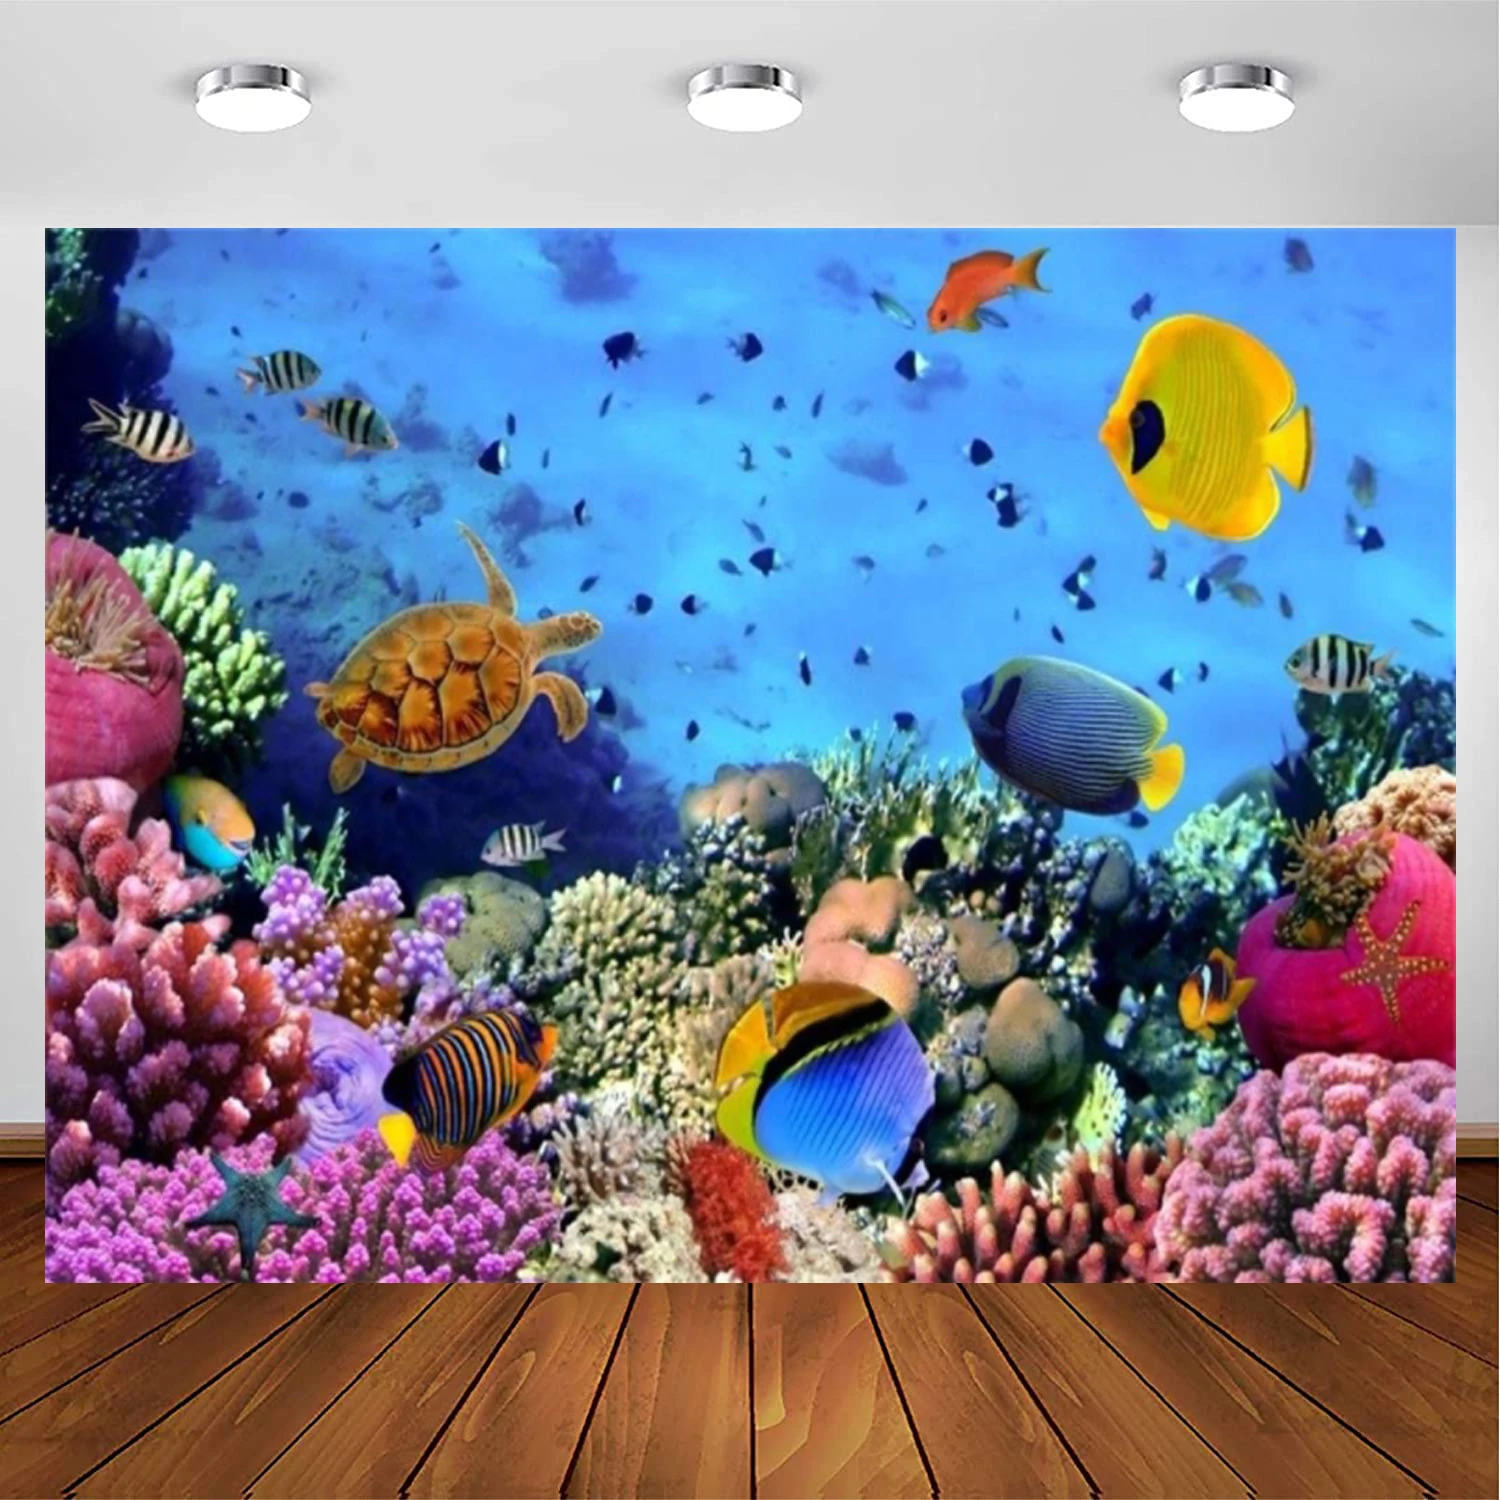 

Under Sea Seabed World Photography Backdrop Underwater Scene Colorful Marine Coral Fishes Aquarium Background Diving Holiday